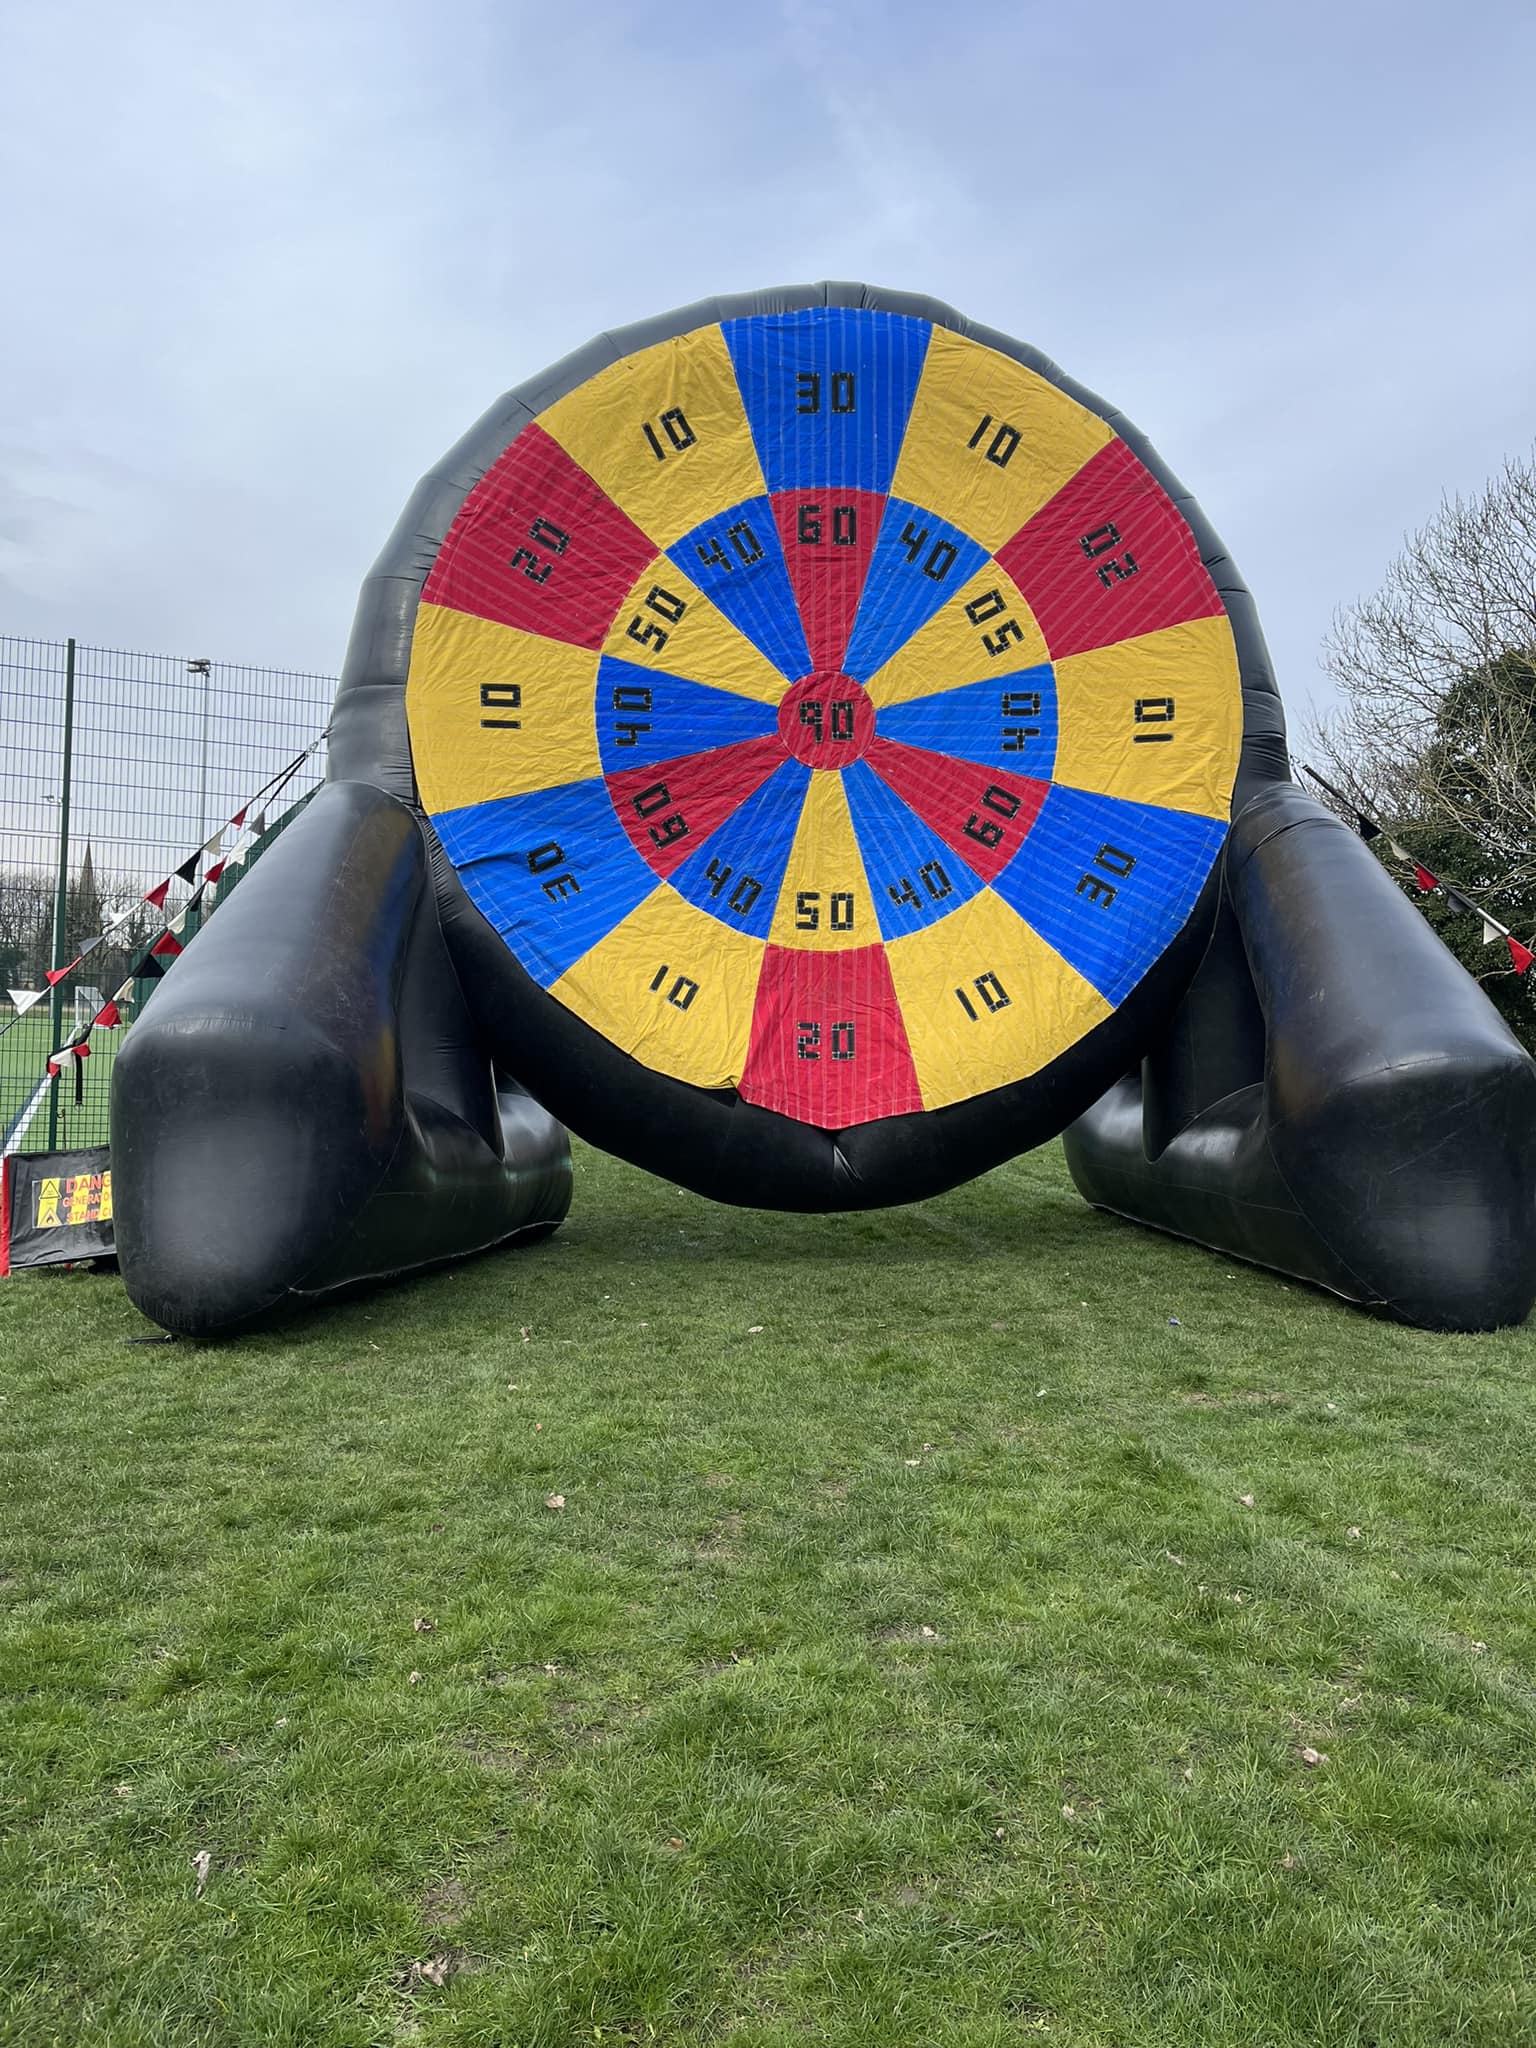 This image shows an inflatable football darts challenge at an event organised by Liverpool FC.